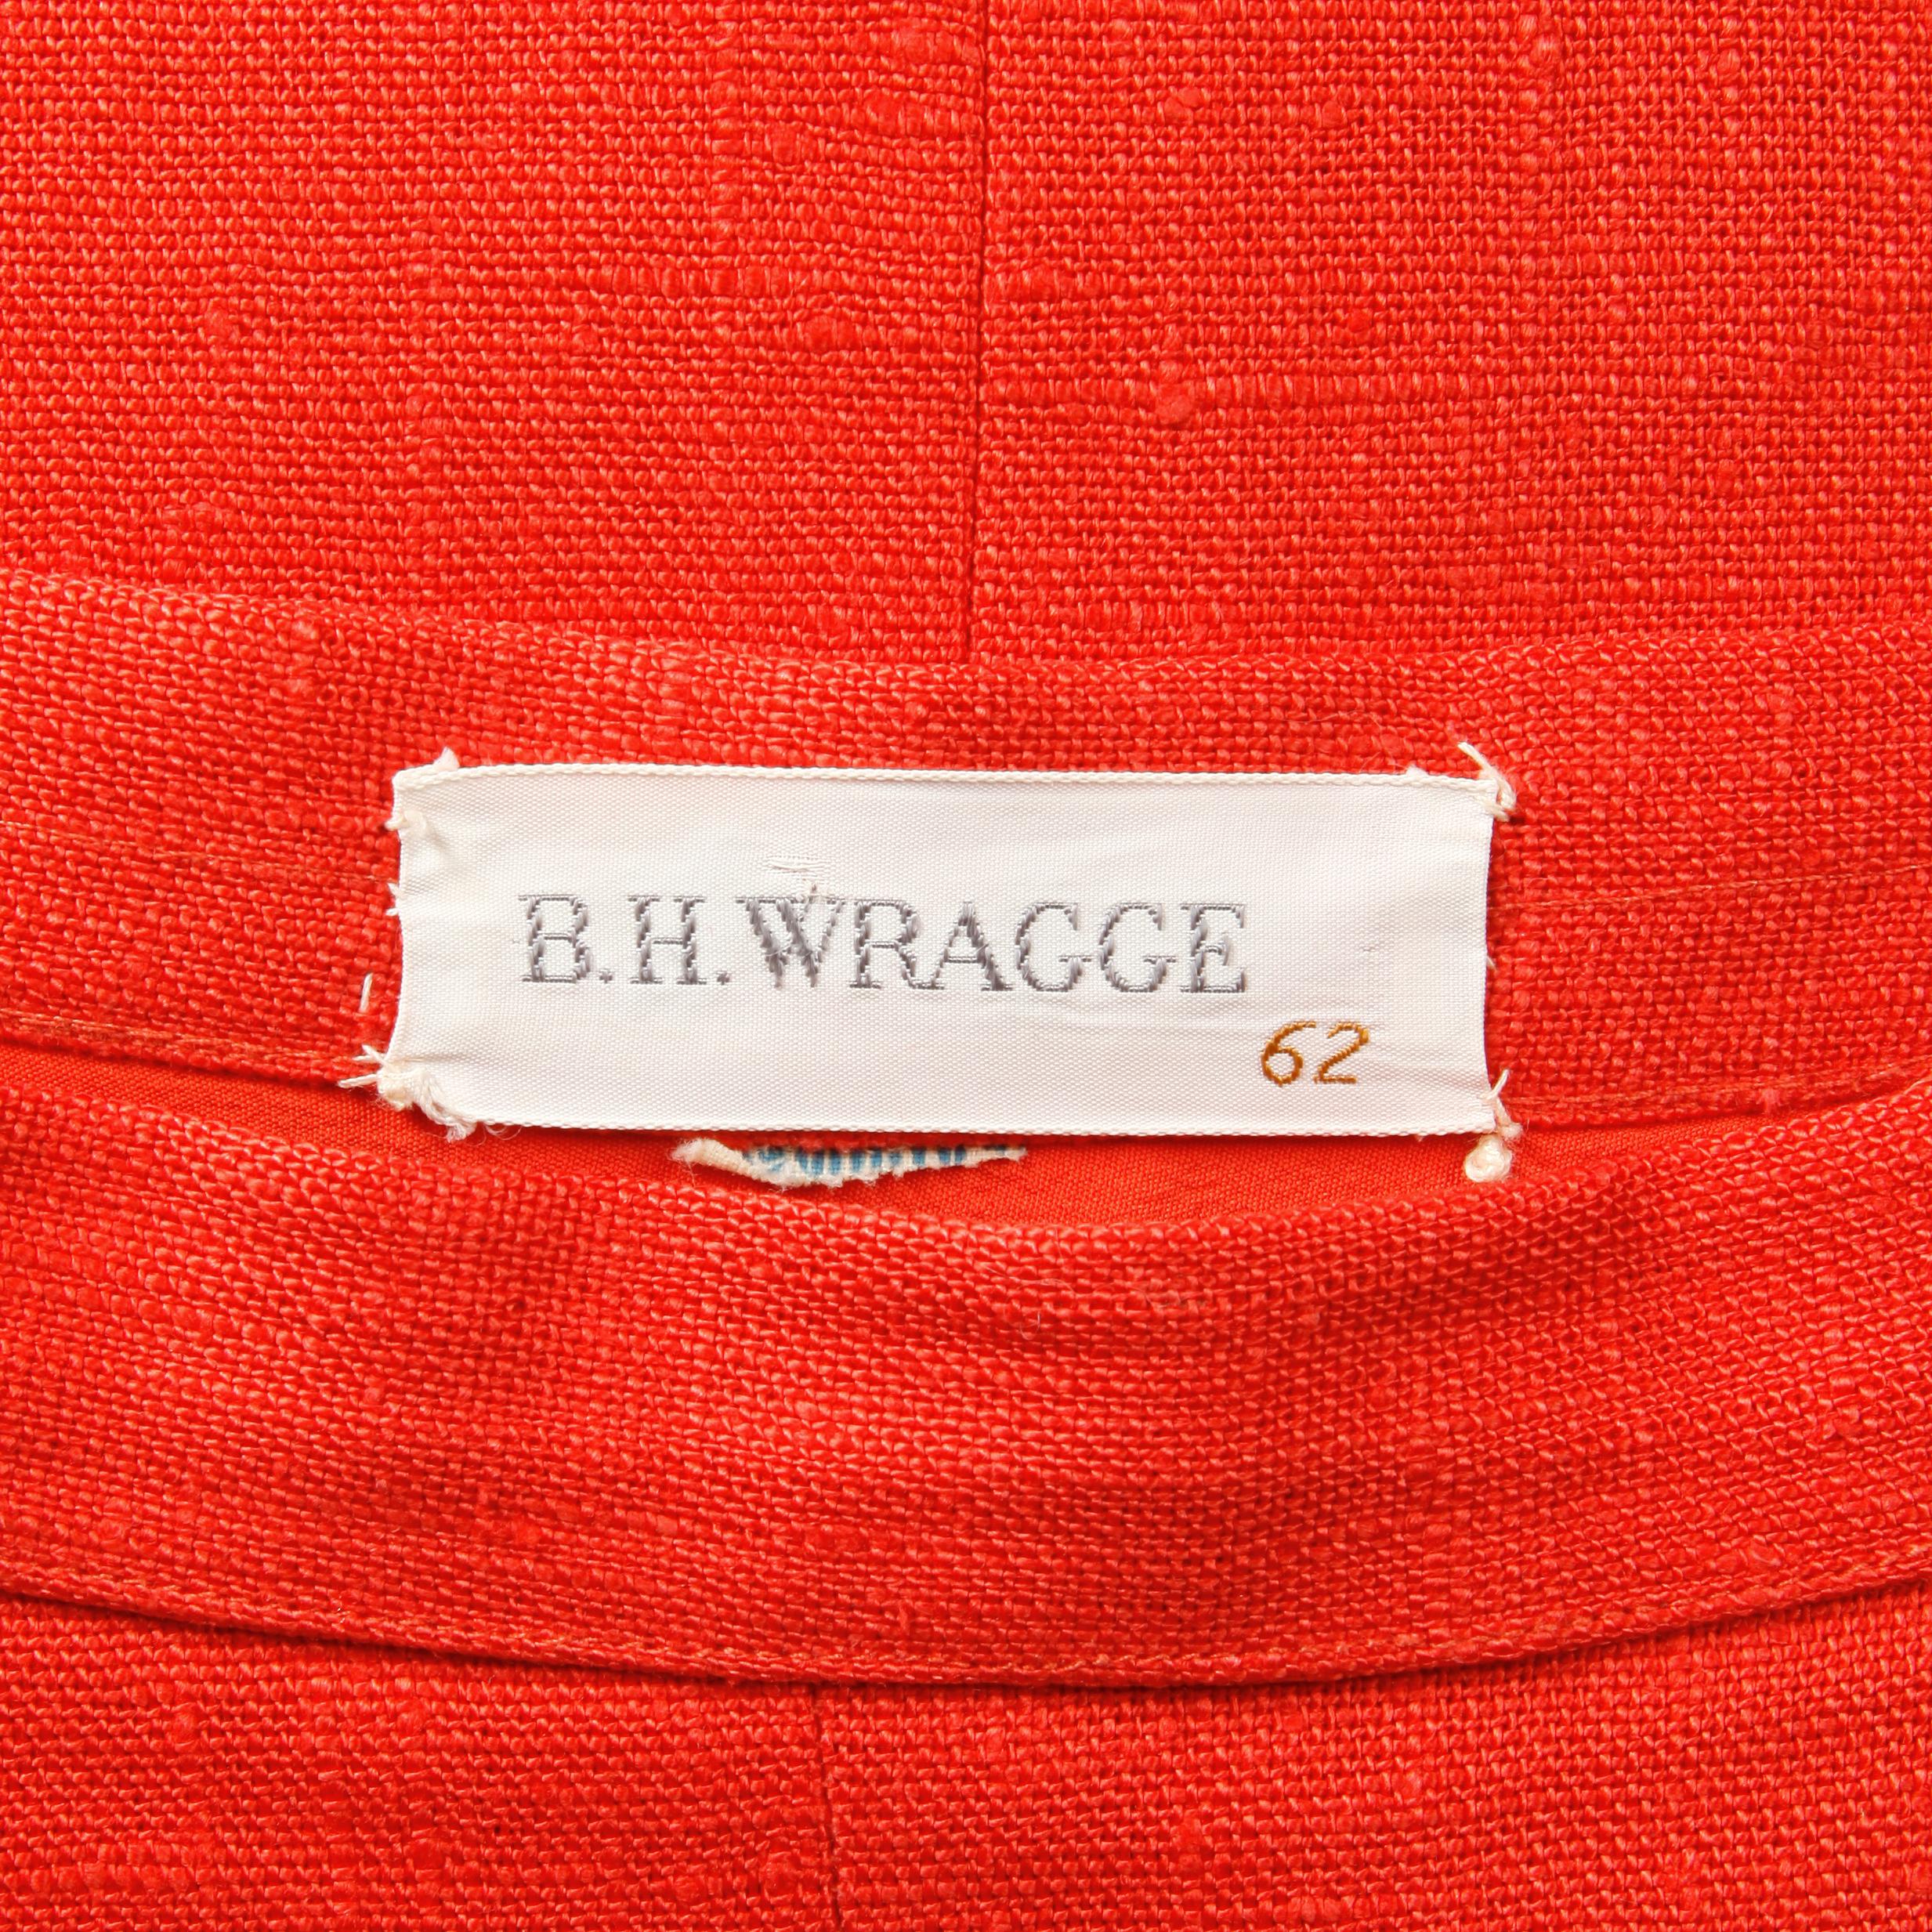 Chic 1960s vintage B.H. Wragge high waisted red pencil skirt in a woven linen. Partially lined with side zip and hook closure. Hidden side pockets. Fits like a modern size small. The waist measures 26